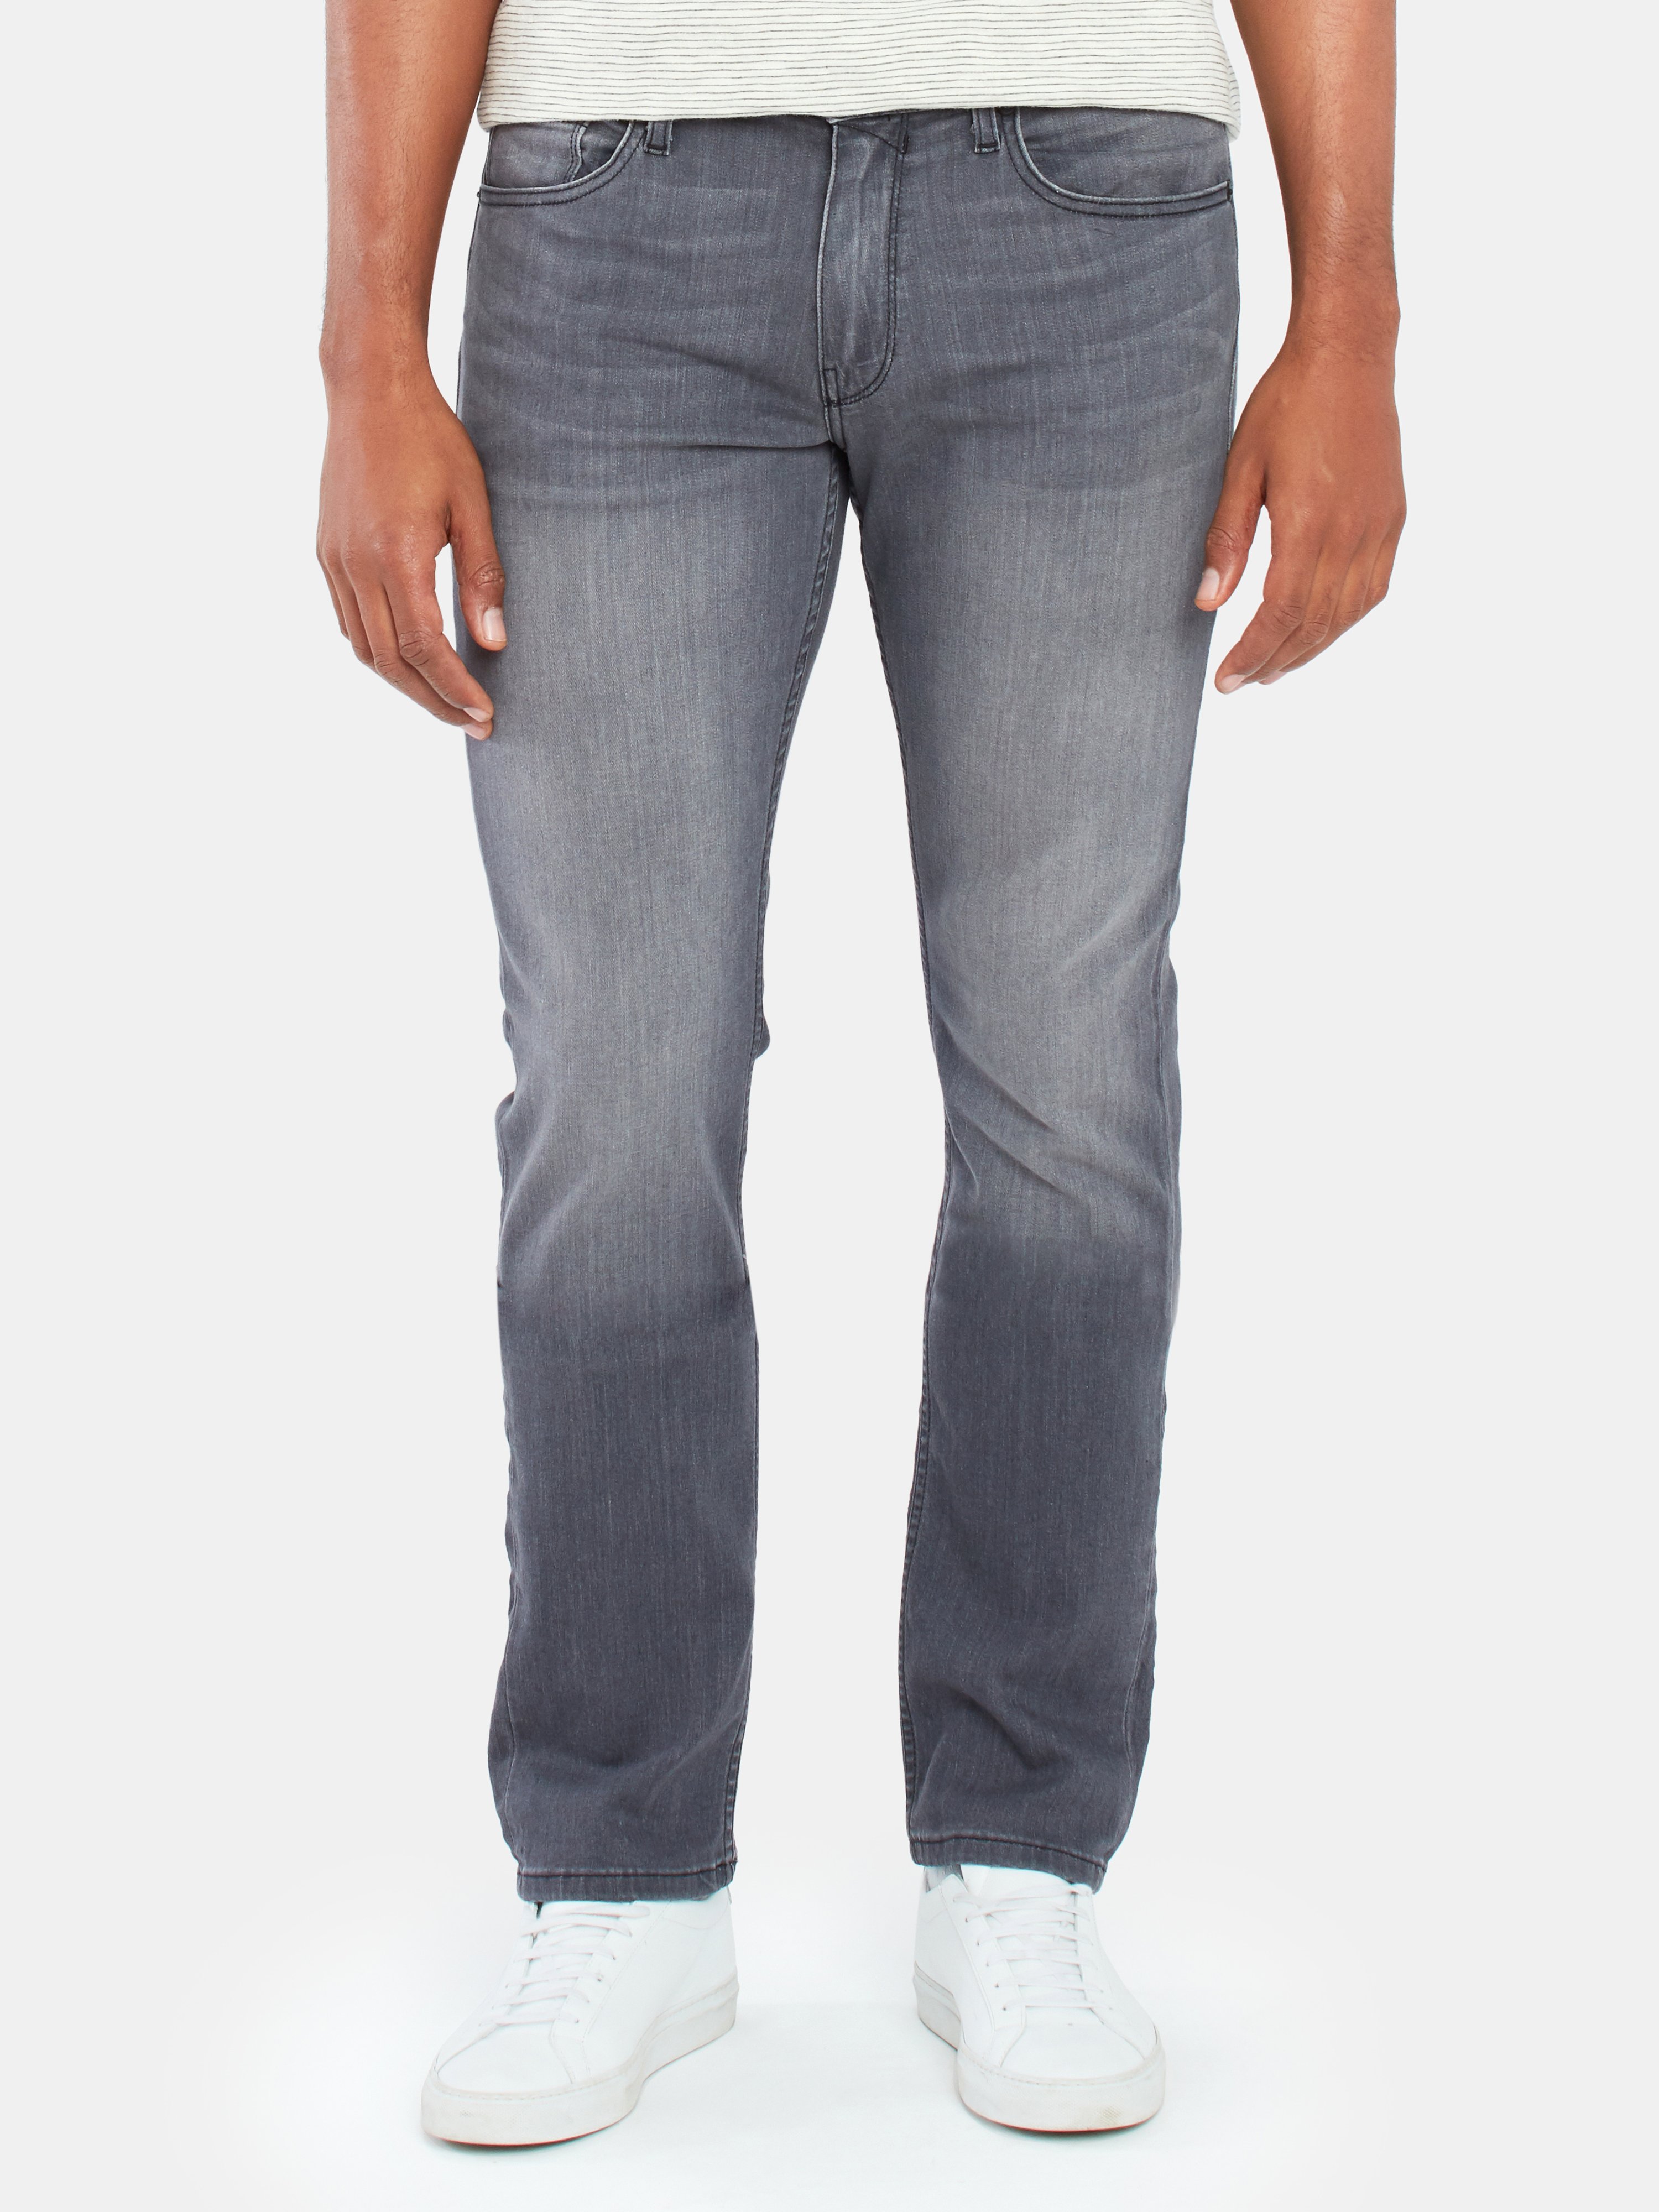 Paige Federal Slim Straight Jeans In Walter